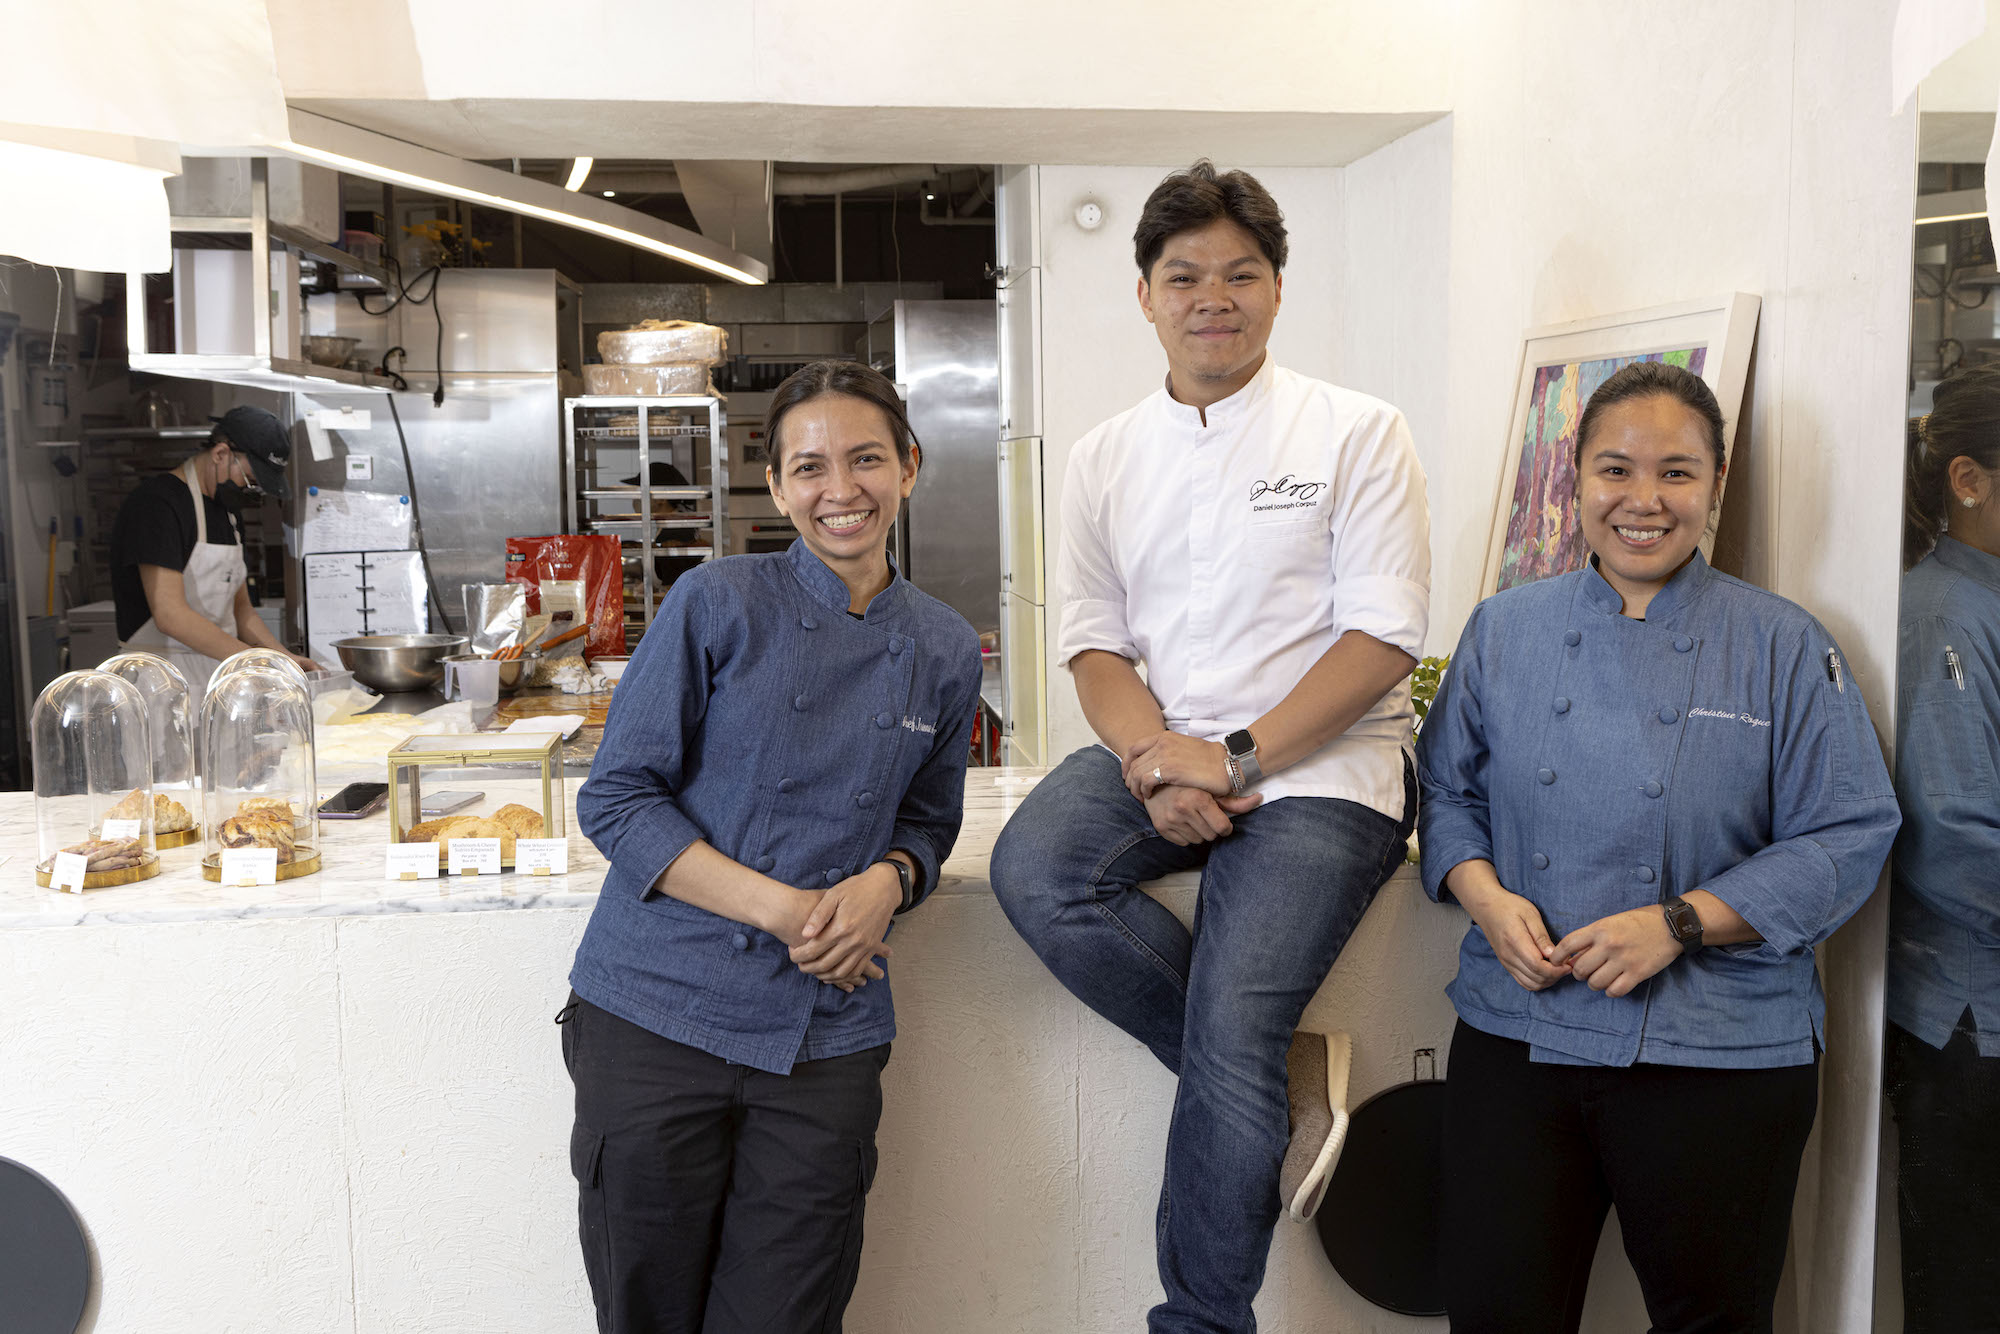 The Half Saints and Daniel Corpuz collaboration is more than just about food